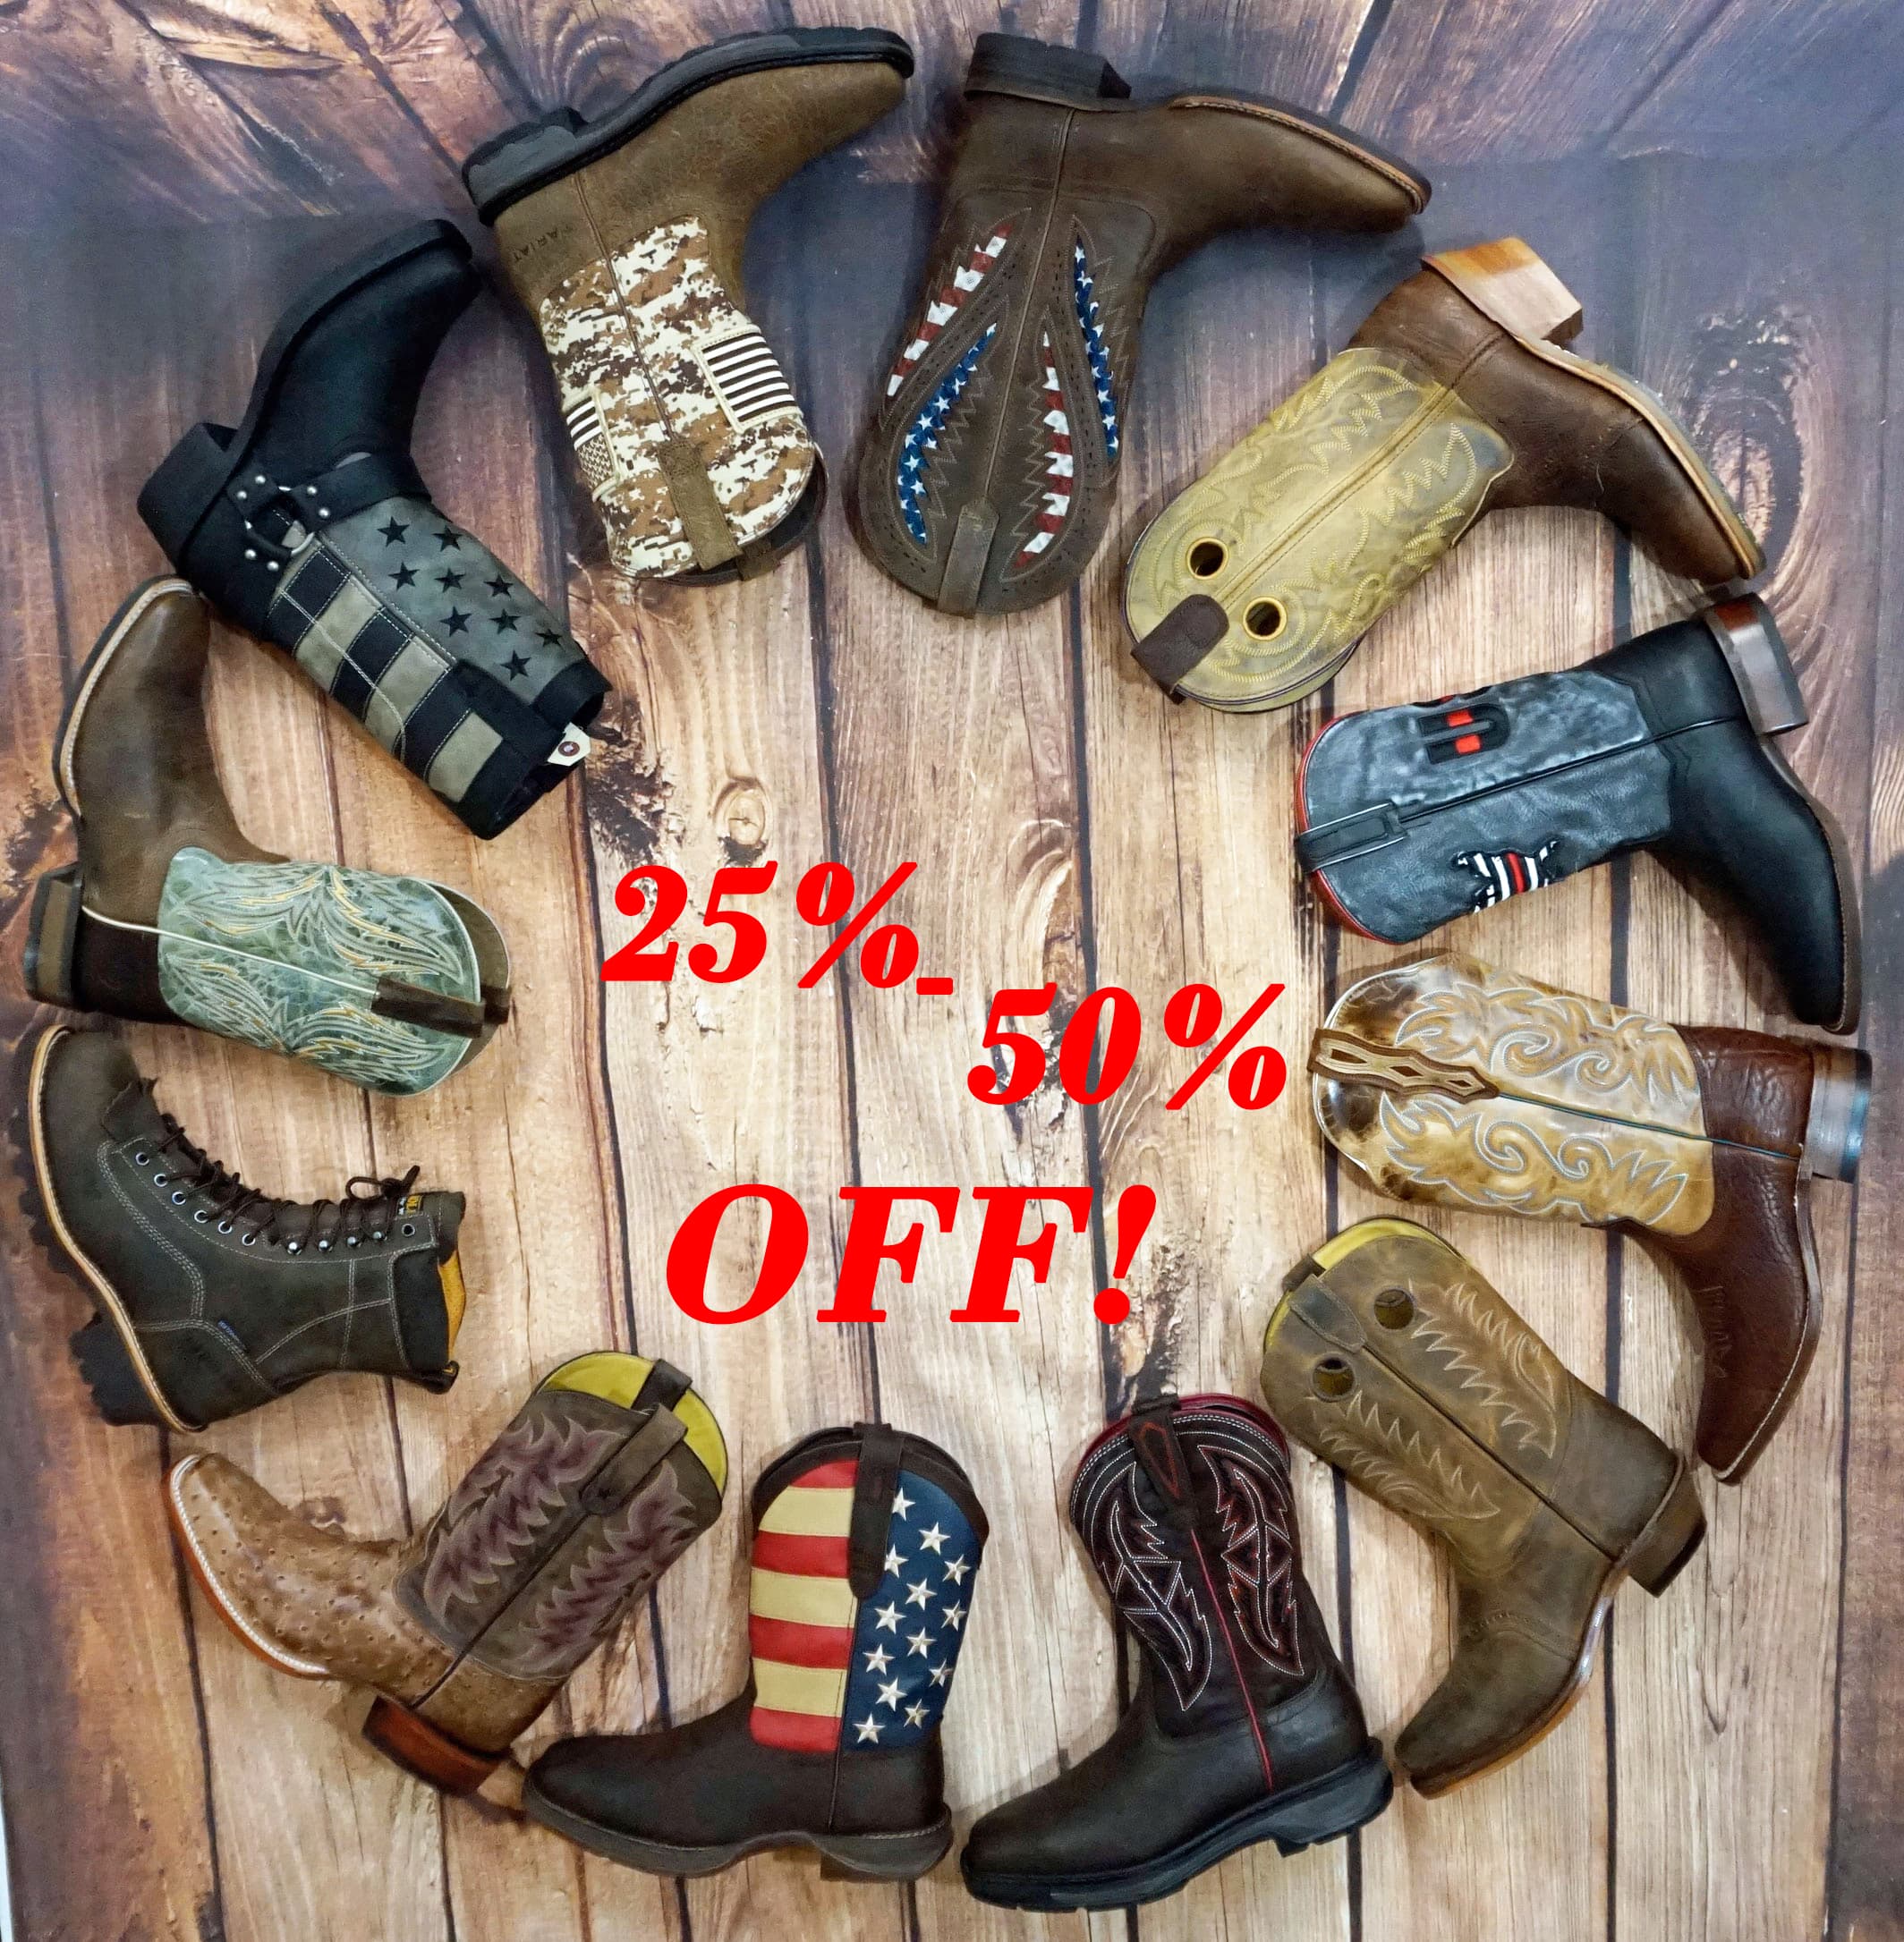 Ring of boots advertising 25-50% off sale at Jackson's Western Store